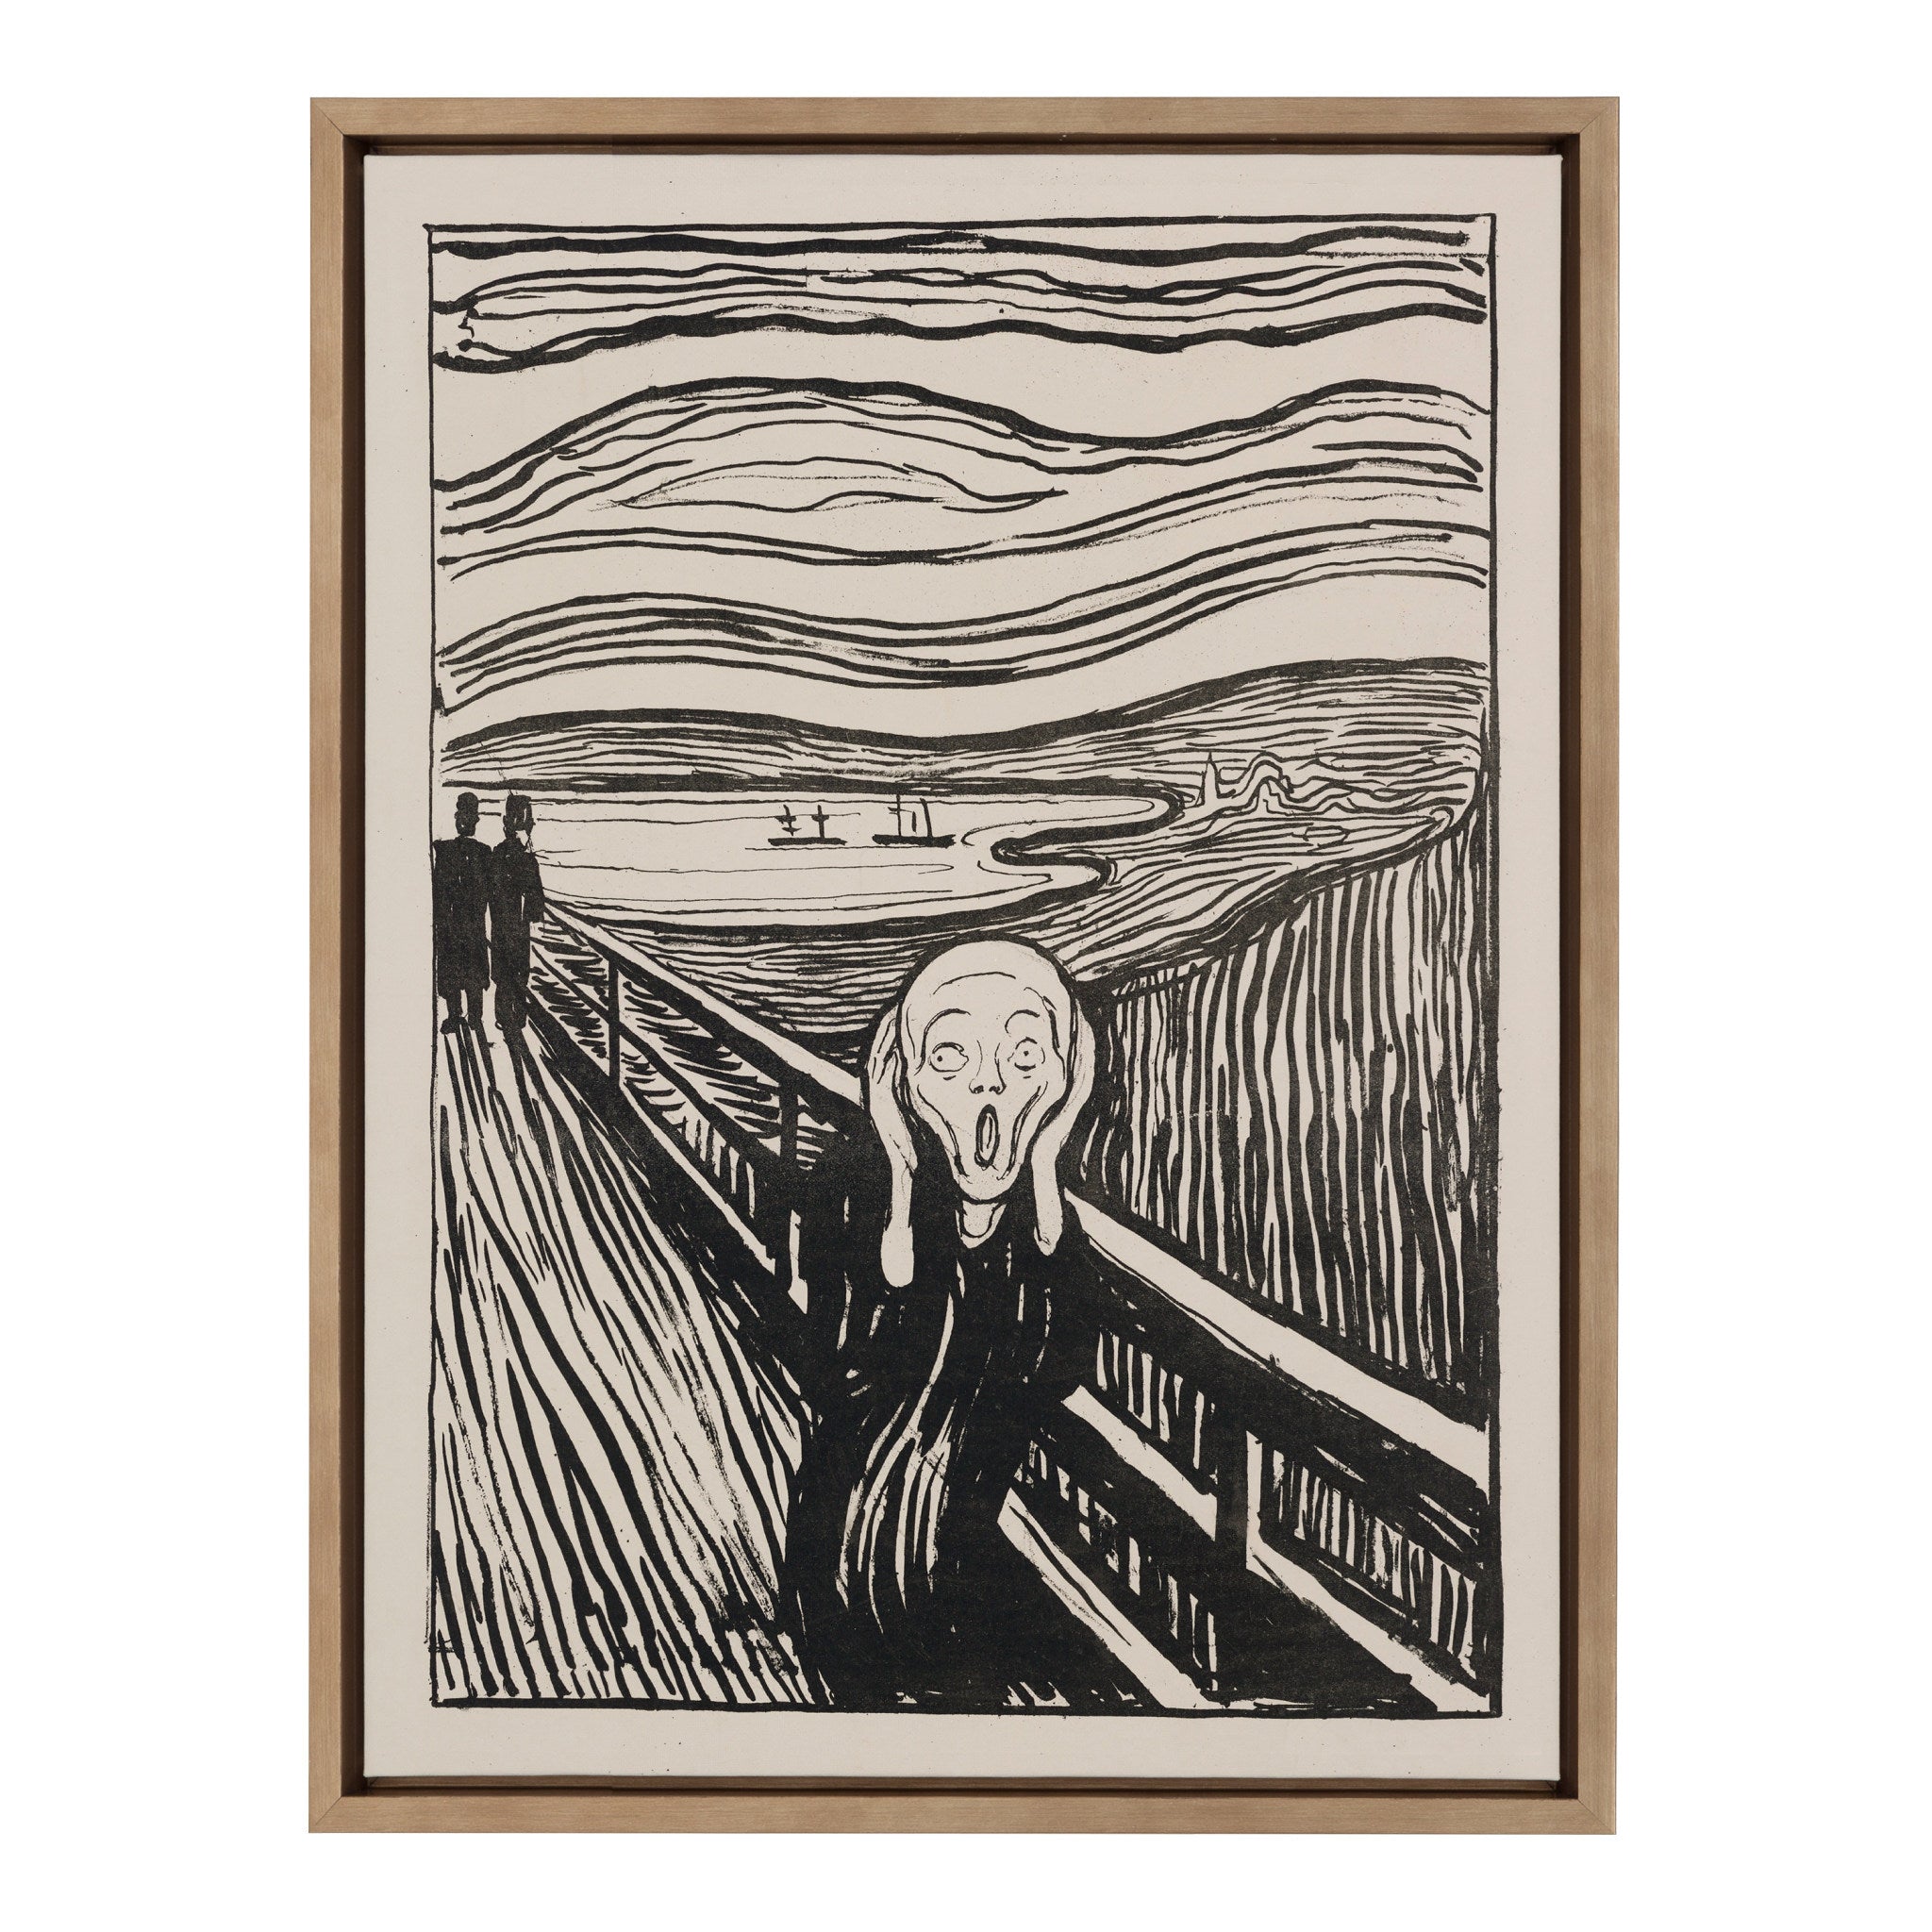 Sylvie Edvard Munch The Scream 1895 The Art Institute of Chicago Framed Canvas by The Art Institute of Chicago